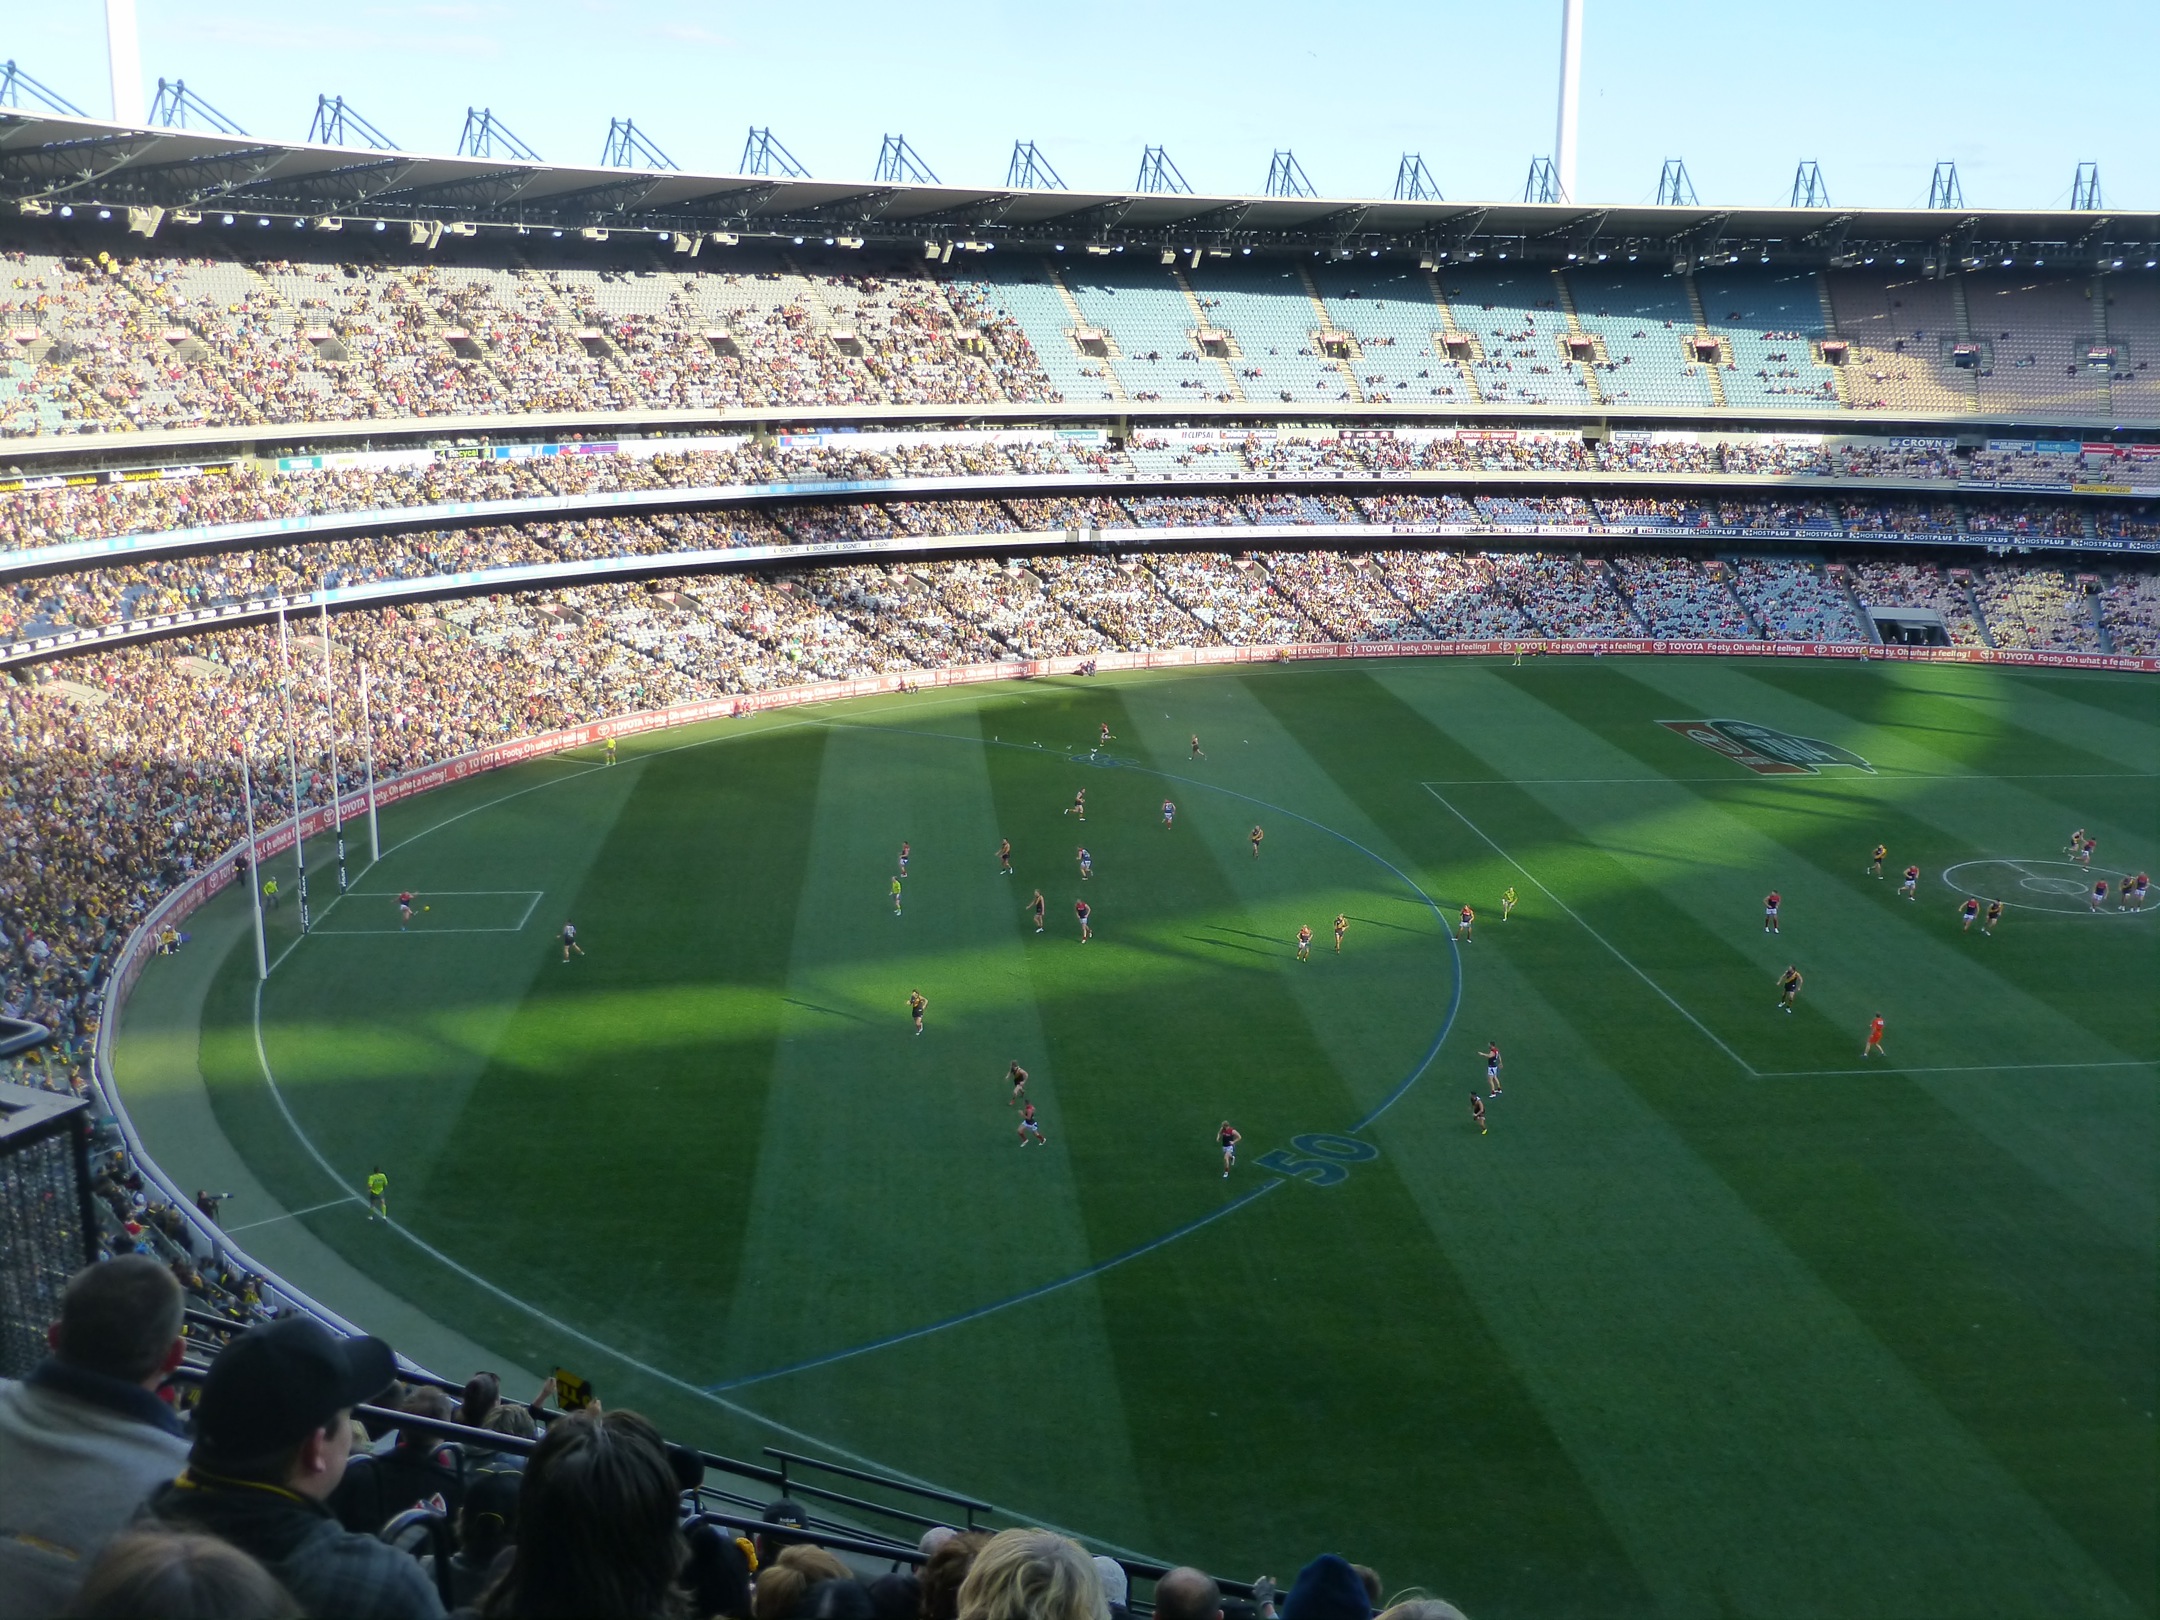 AFL Game (footy) @MCG in Melbourne